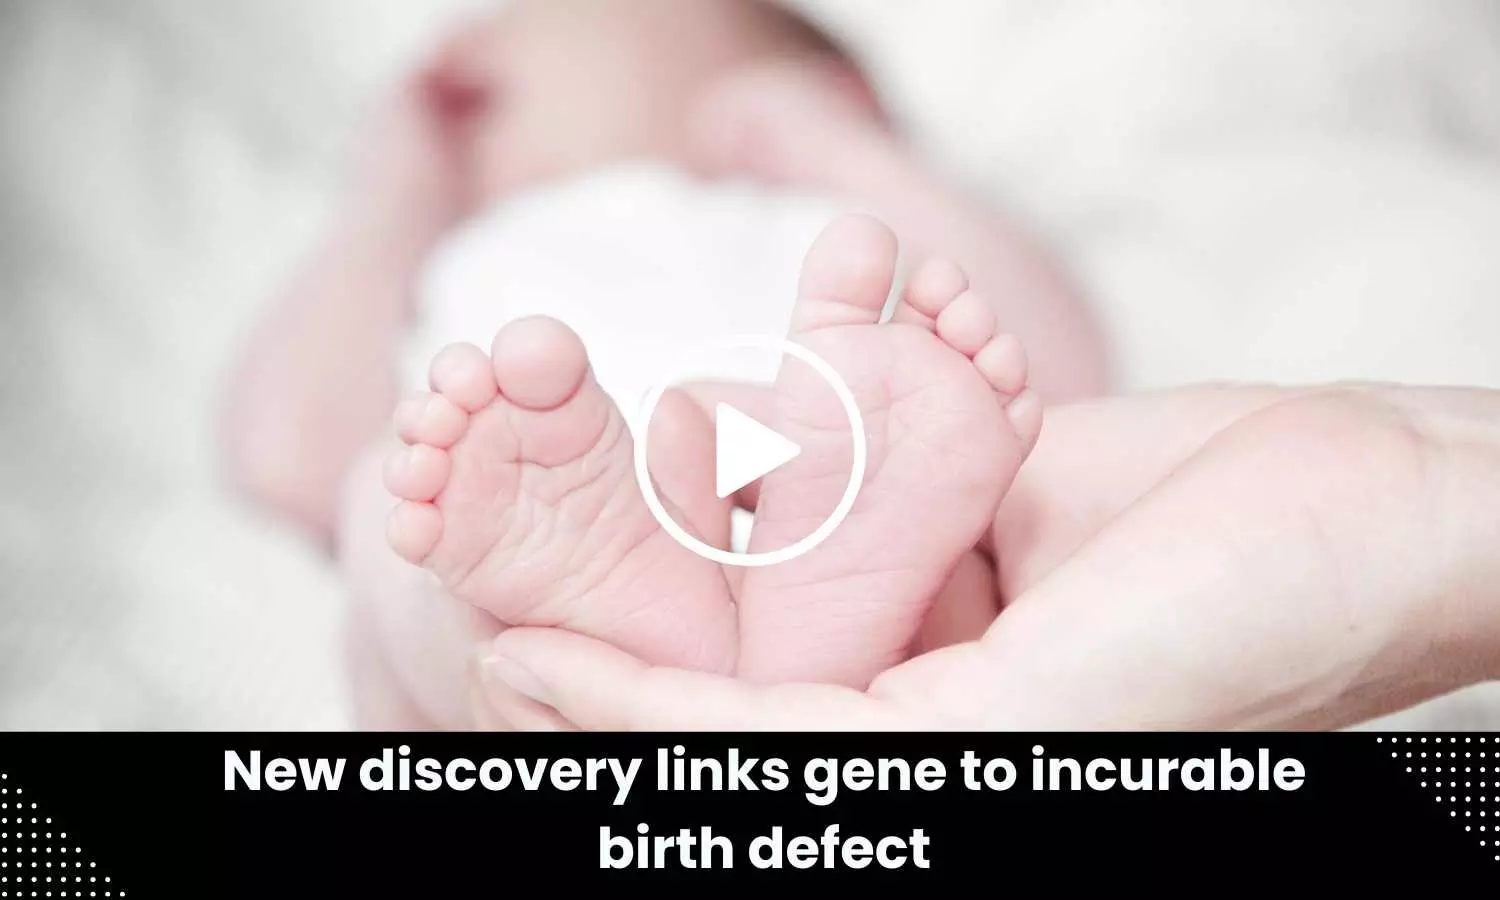 New discovery links gene to incurable birth defect